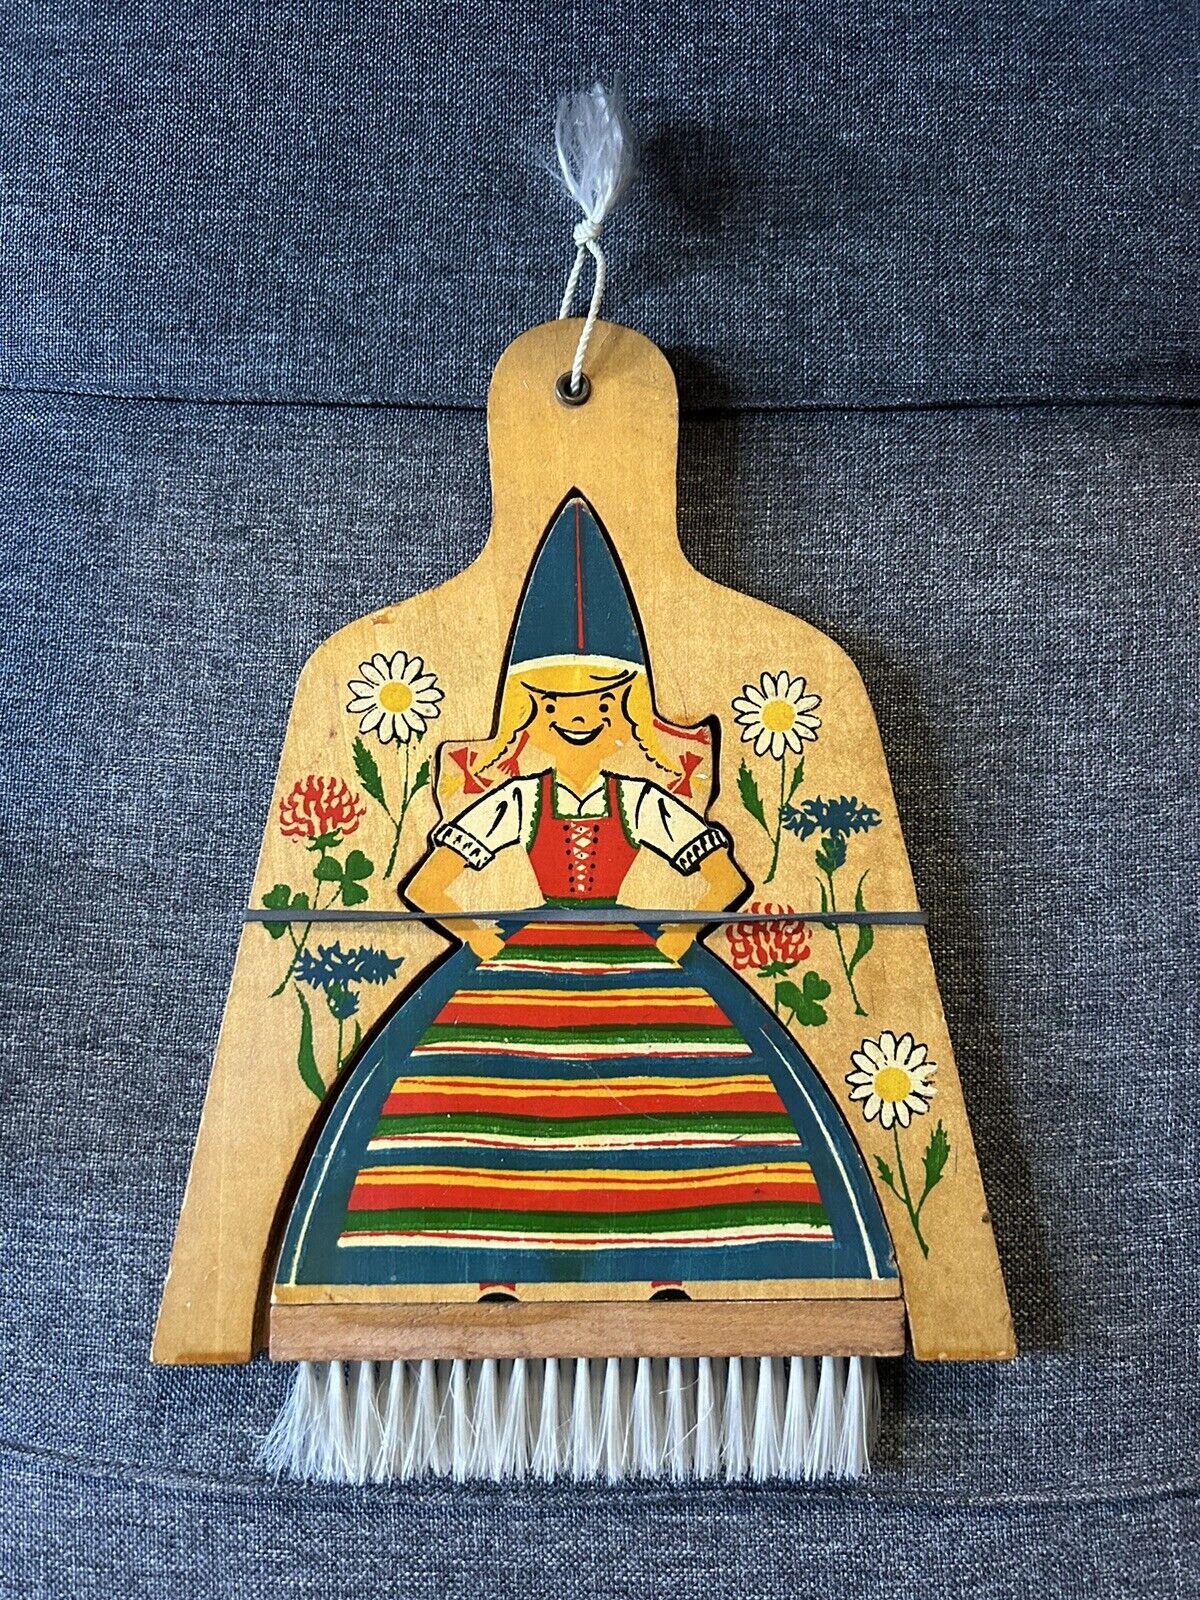 Vintage Wooden Swedish Wall Decor Hanging Hand Painted Wooden Dust Pan & Brush